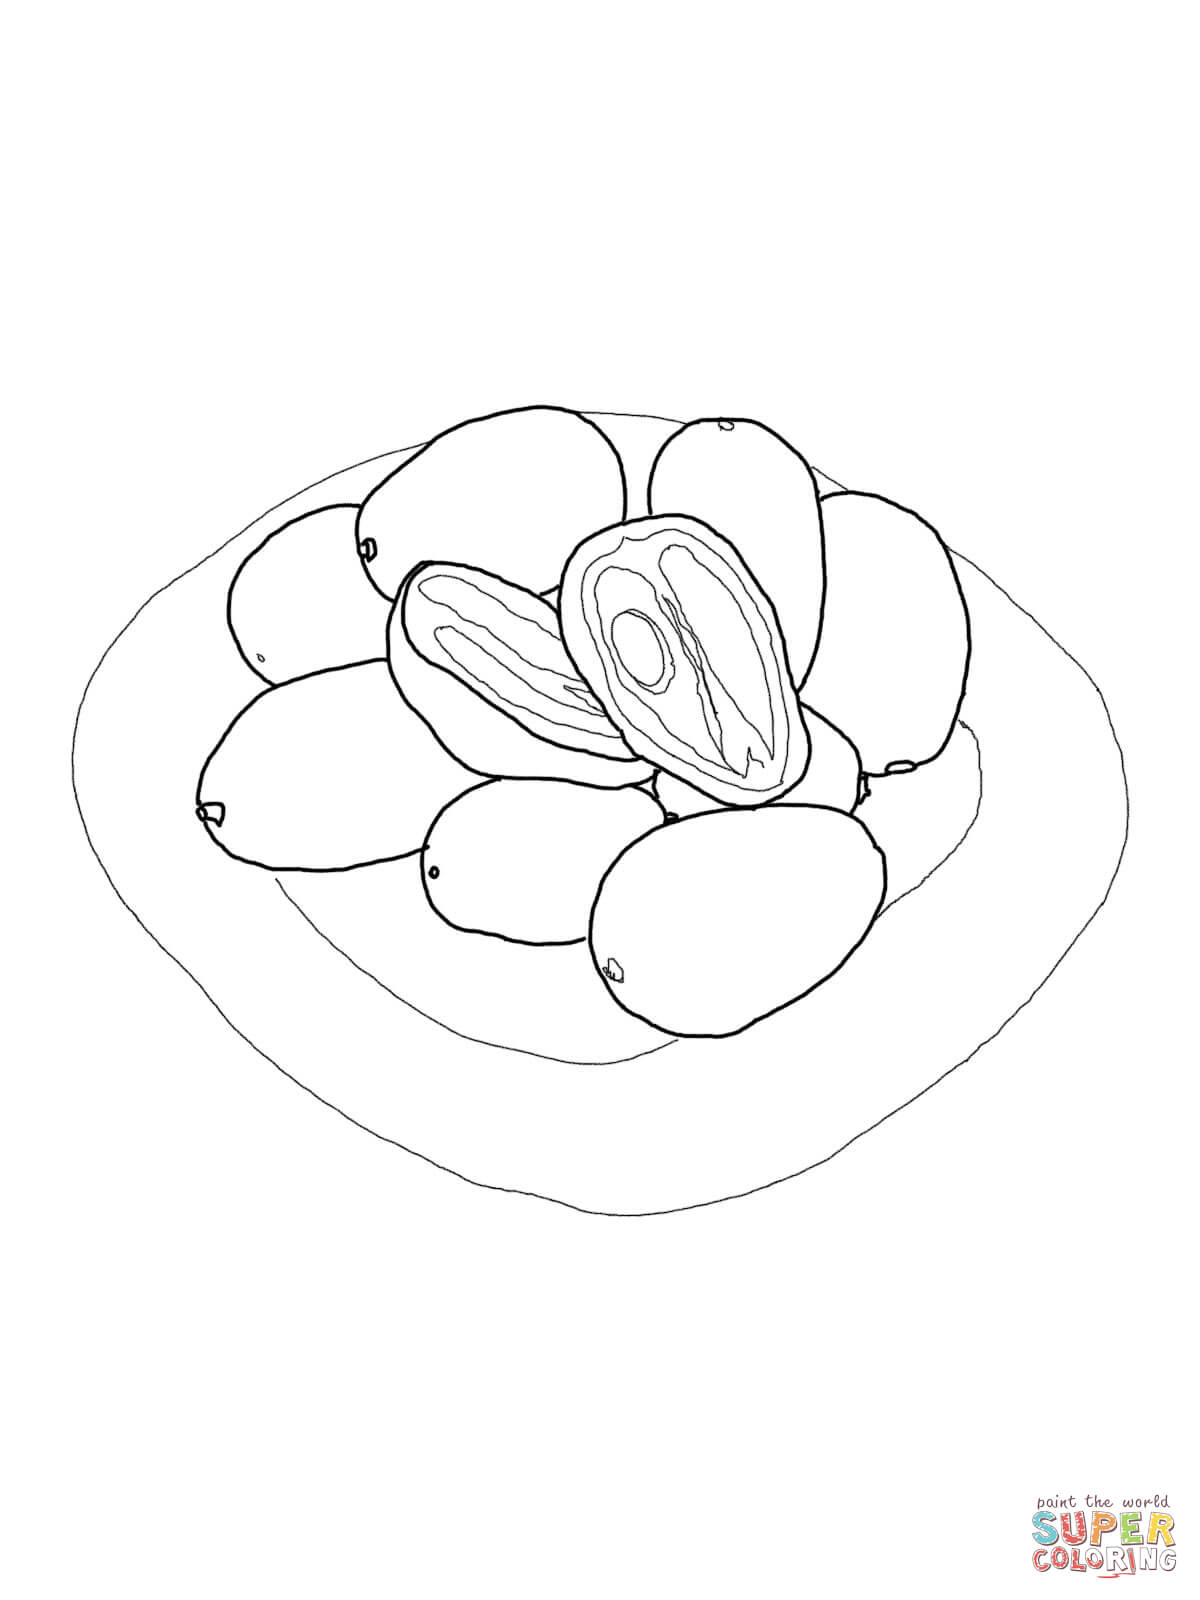 Plate Coloring Page Kumquats On Plate Coloring Page Free Printable Coloring Pages